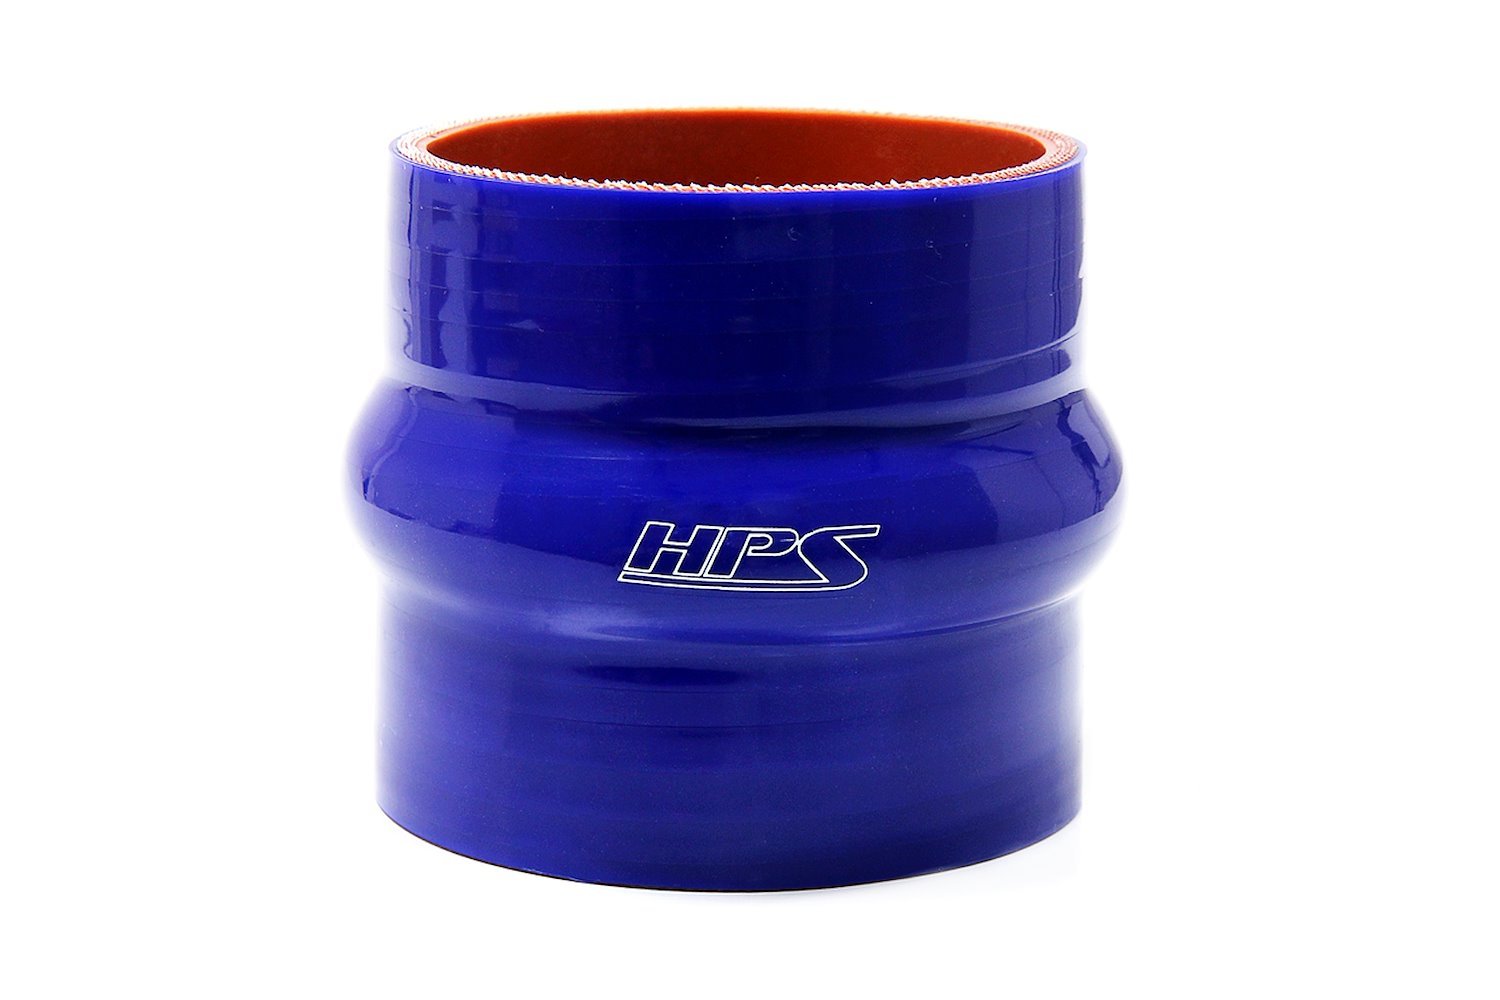 HTSHC-350-L6-BLUE Silicone Hump Coupler Hose, High-Temp 4-Ply Reinforced, 3-1/2 in. ID, 6 in. Long, Blue